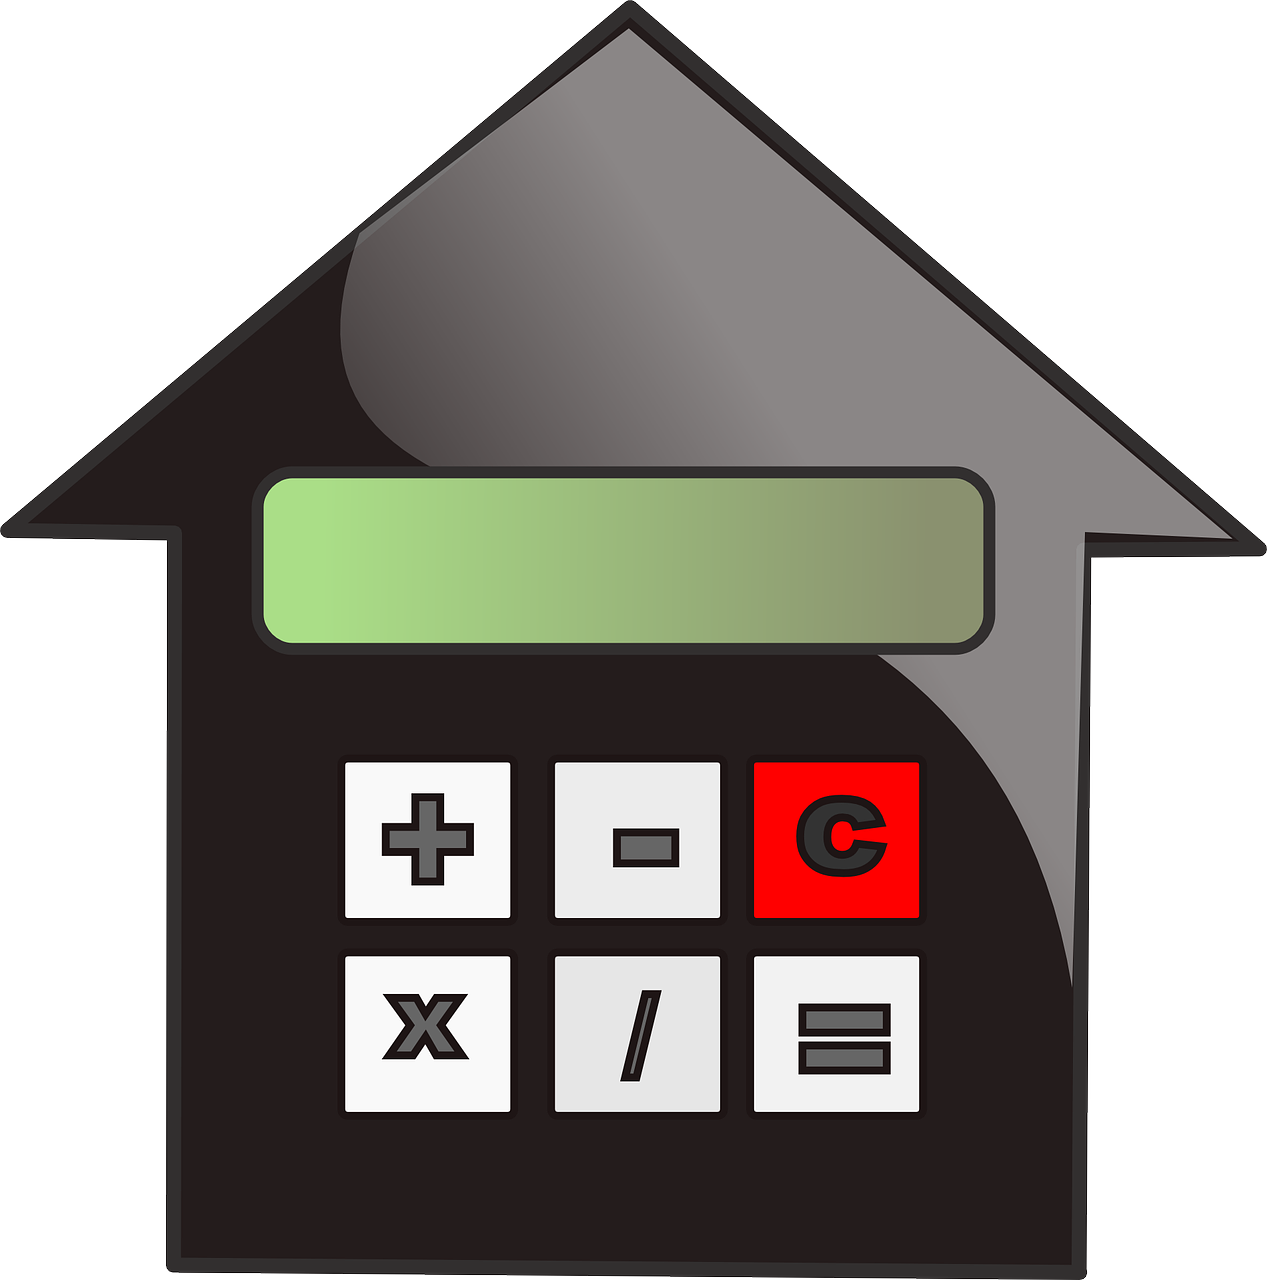 valuation, mortgage, calculate